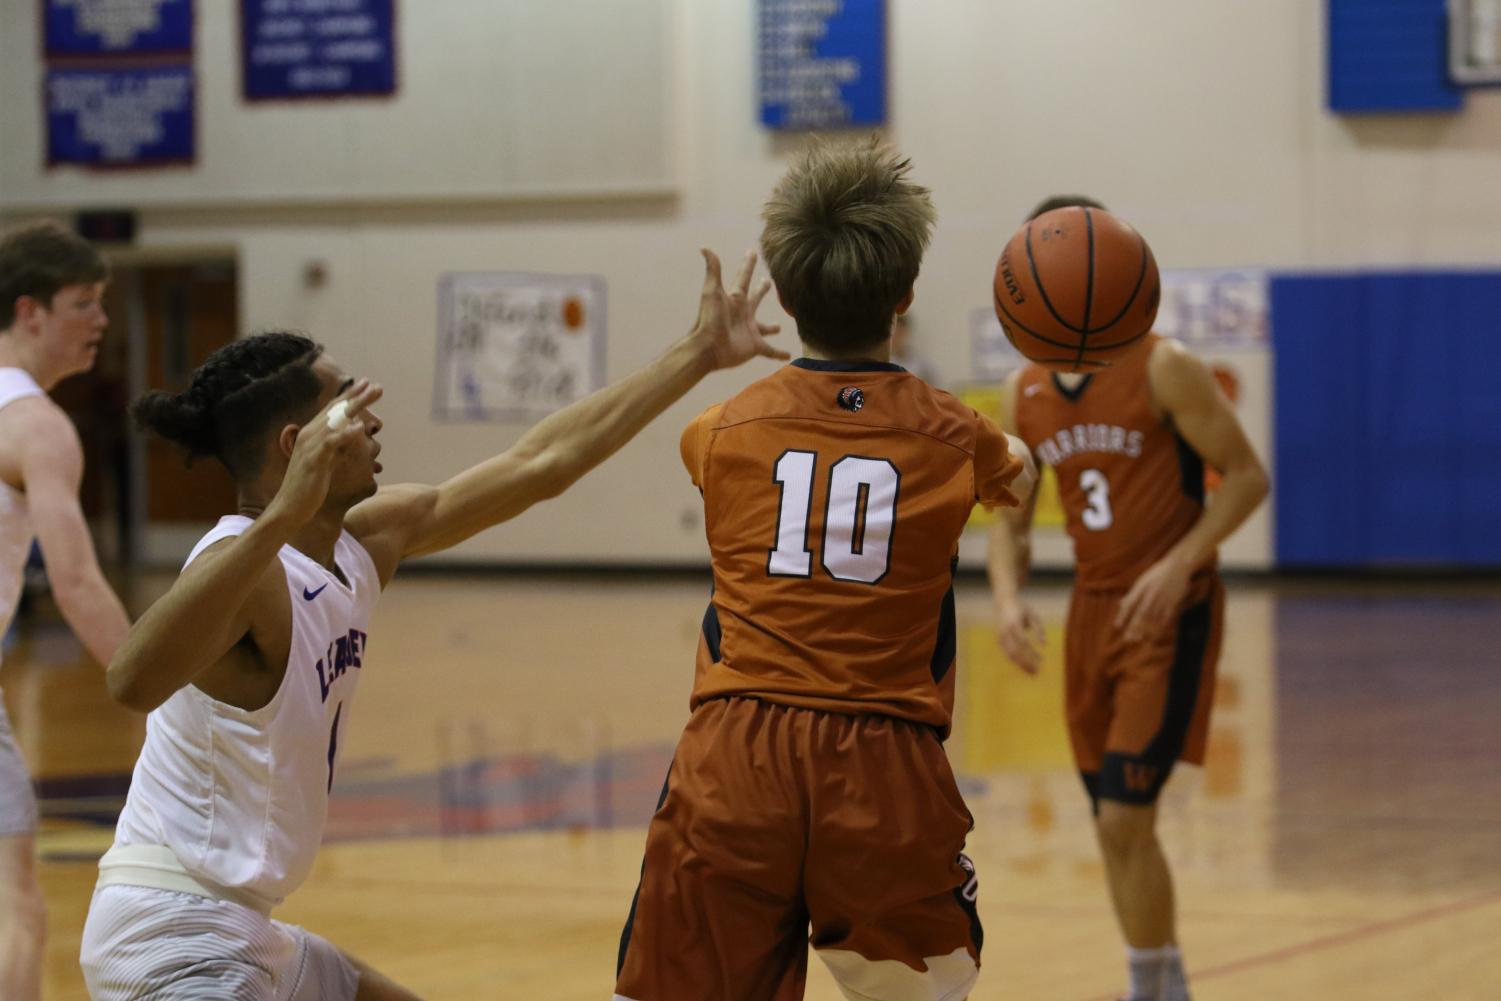 Varsity+Boys+Basketball+Wins+in+Buzzer+Beater+over+Leander+Lions+42-40